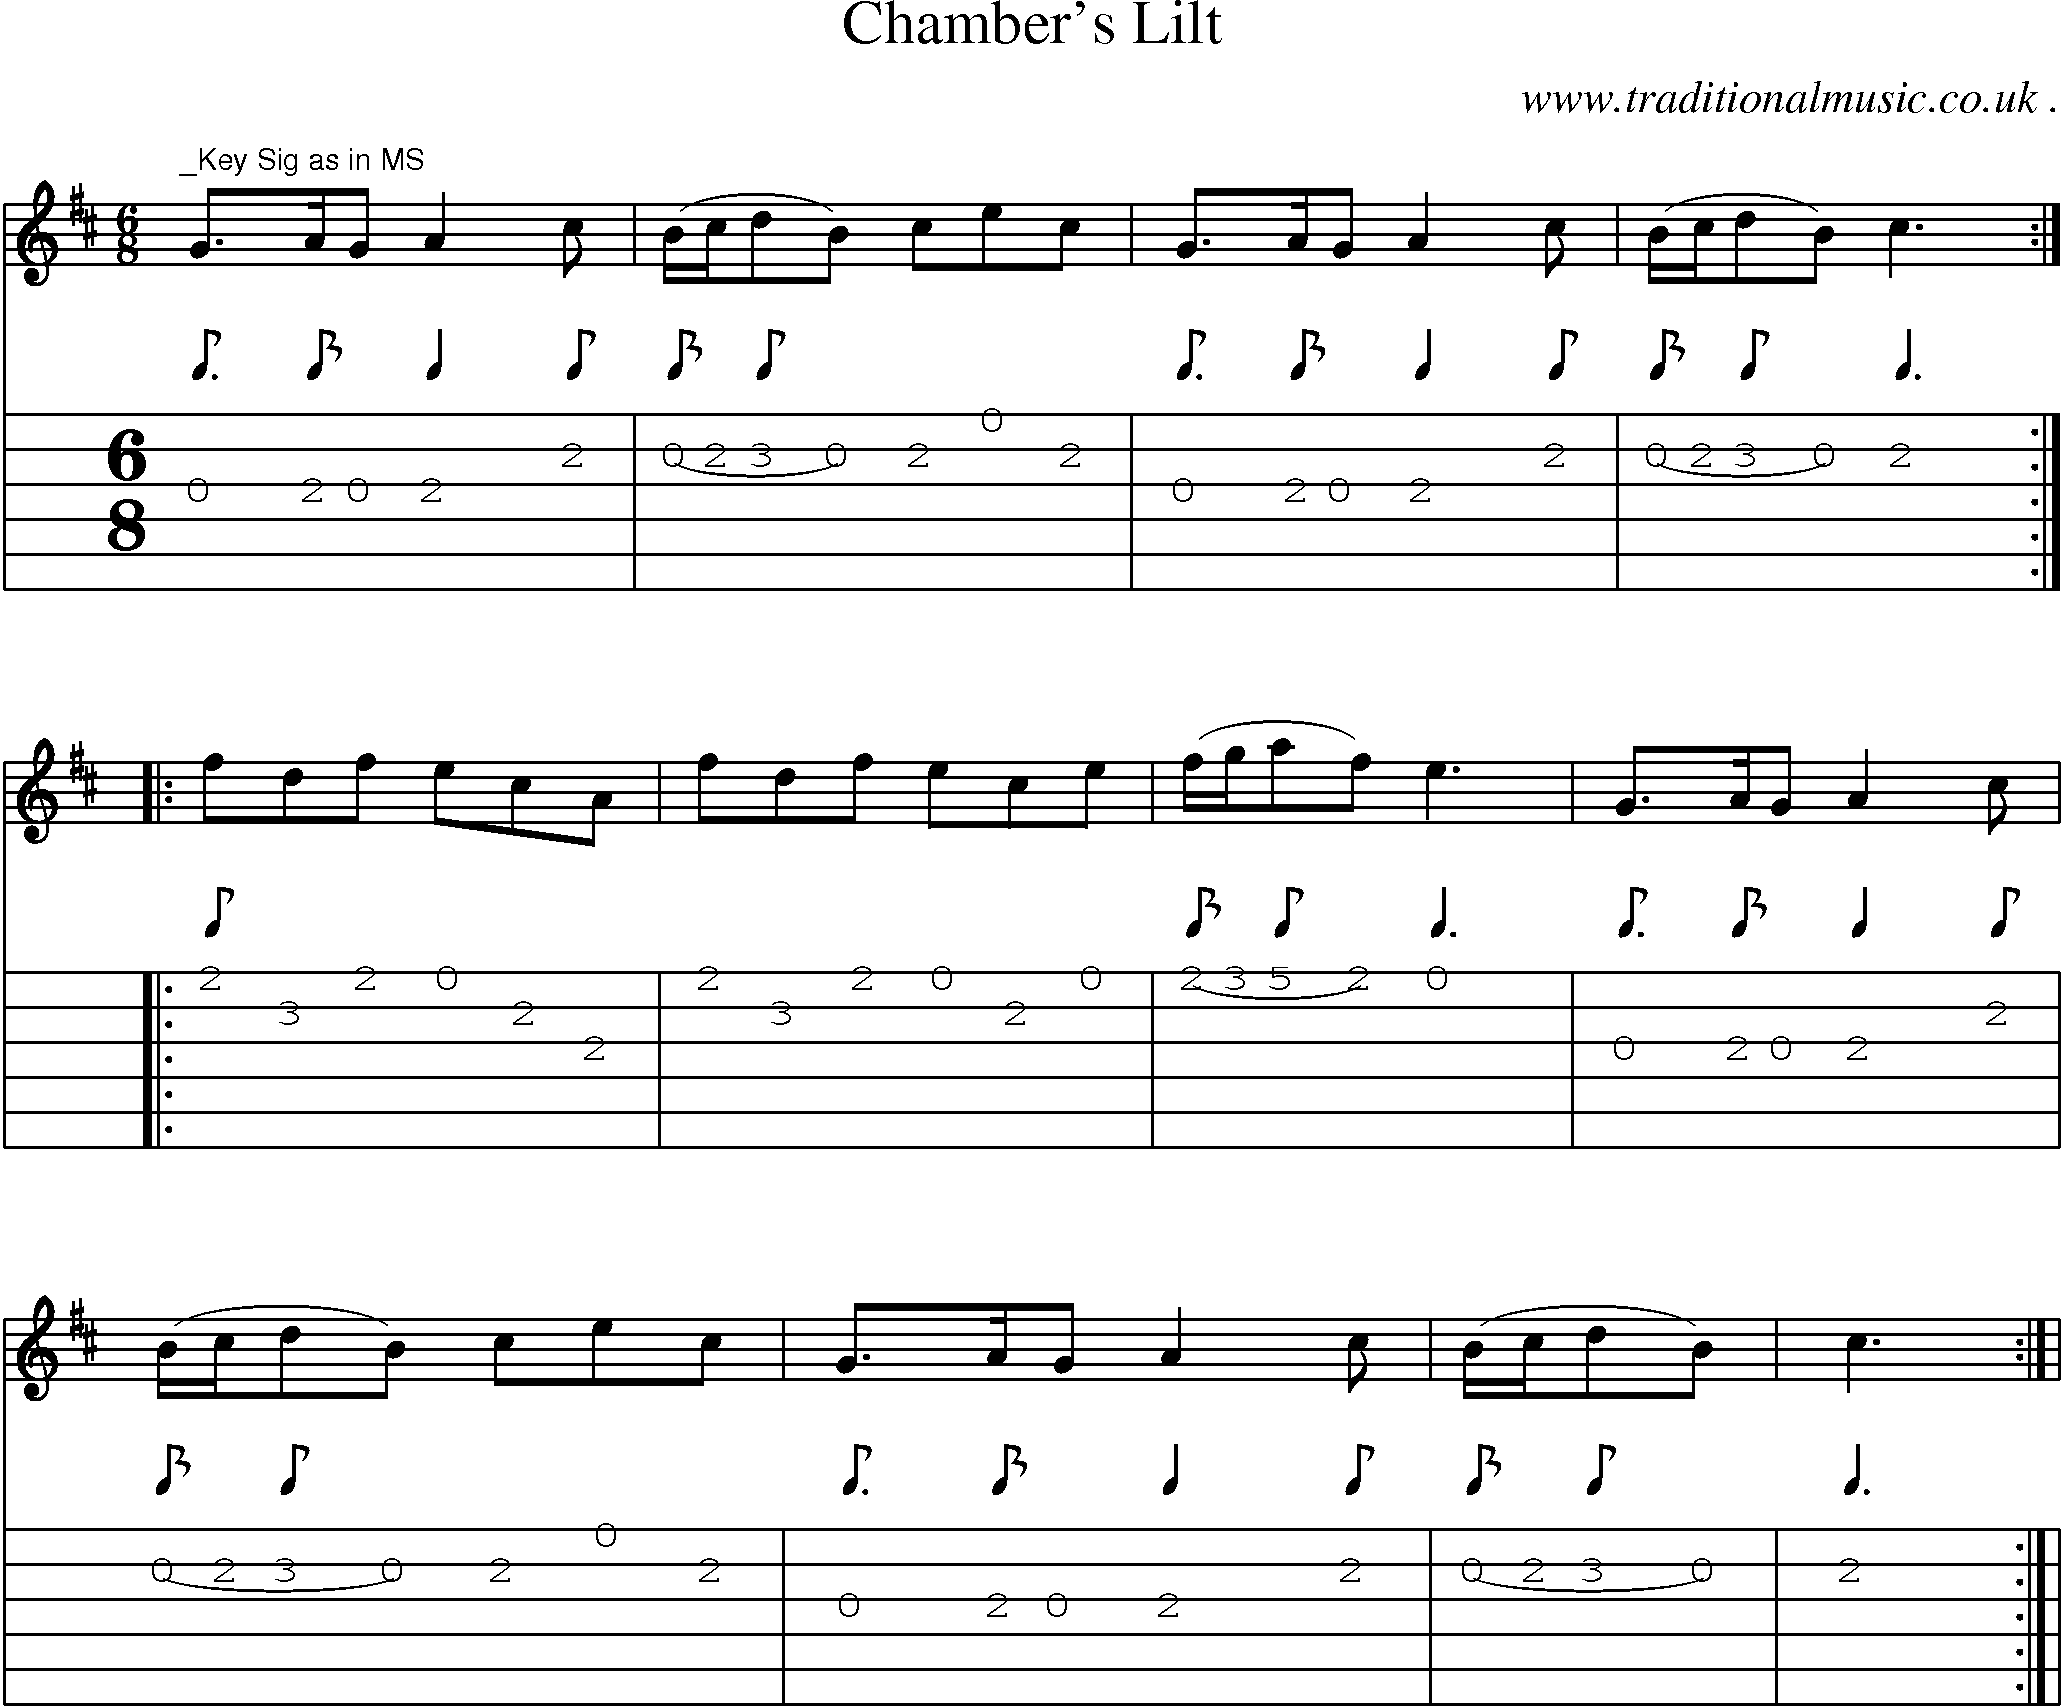 Sheet-Music and Guitar Tabs for Chambers Lilt